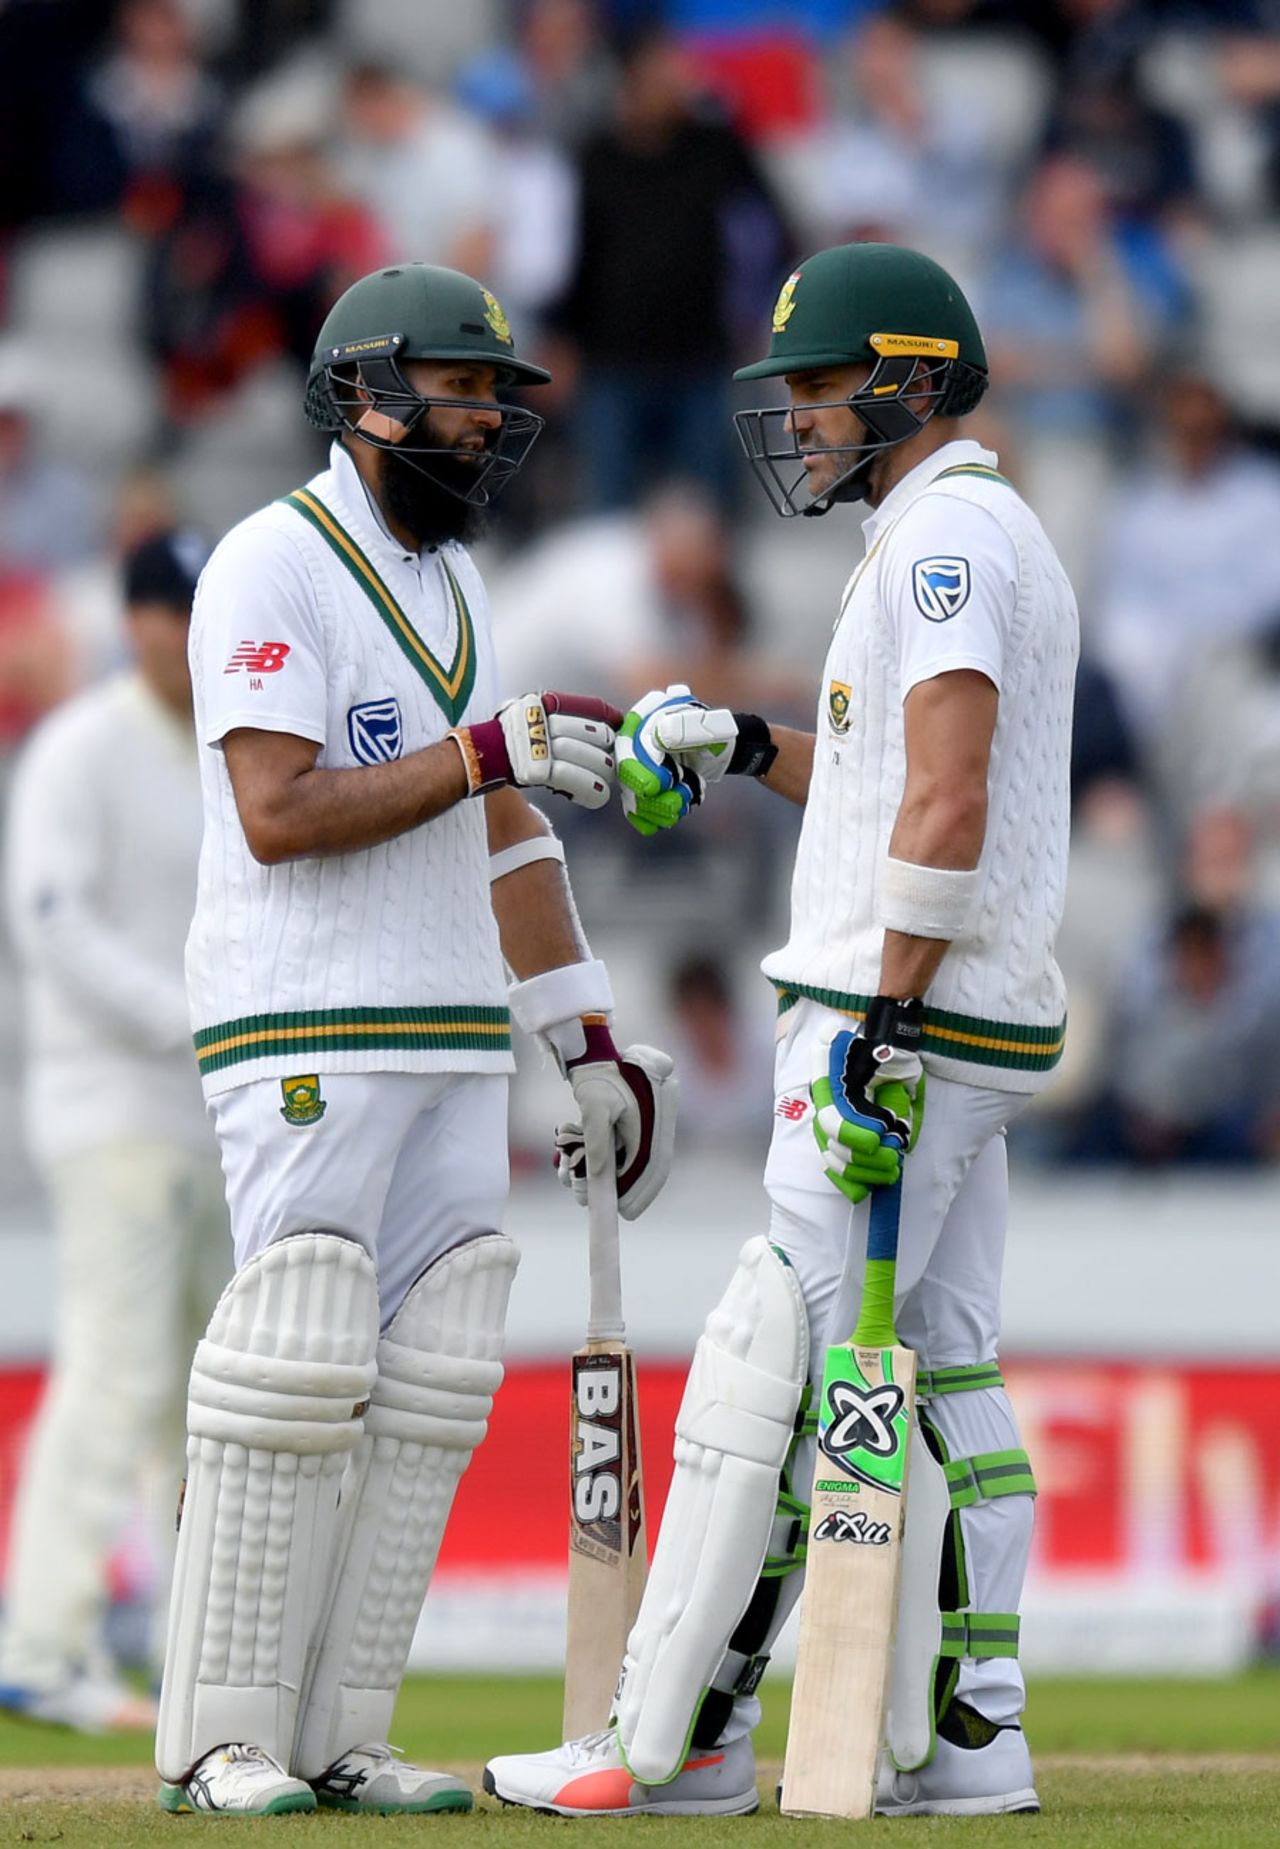 Hashim Amla and Faf du Plessis put on a resilient stand, England v South Africa, 4th Investec Test, Old Trafford, 4th day, August 7, 2017